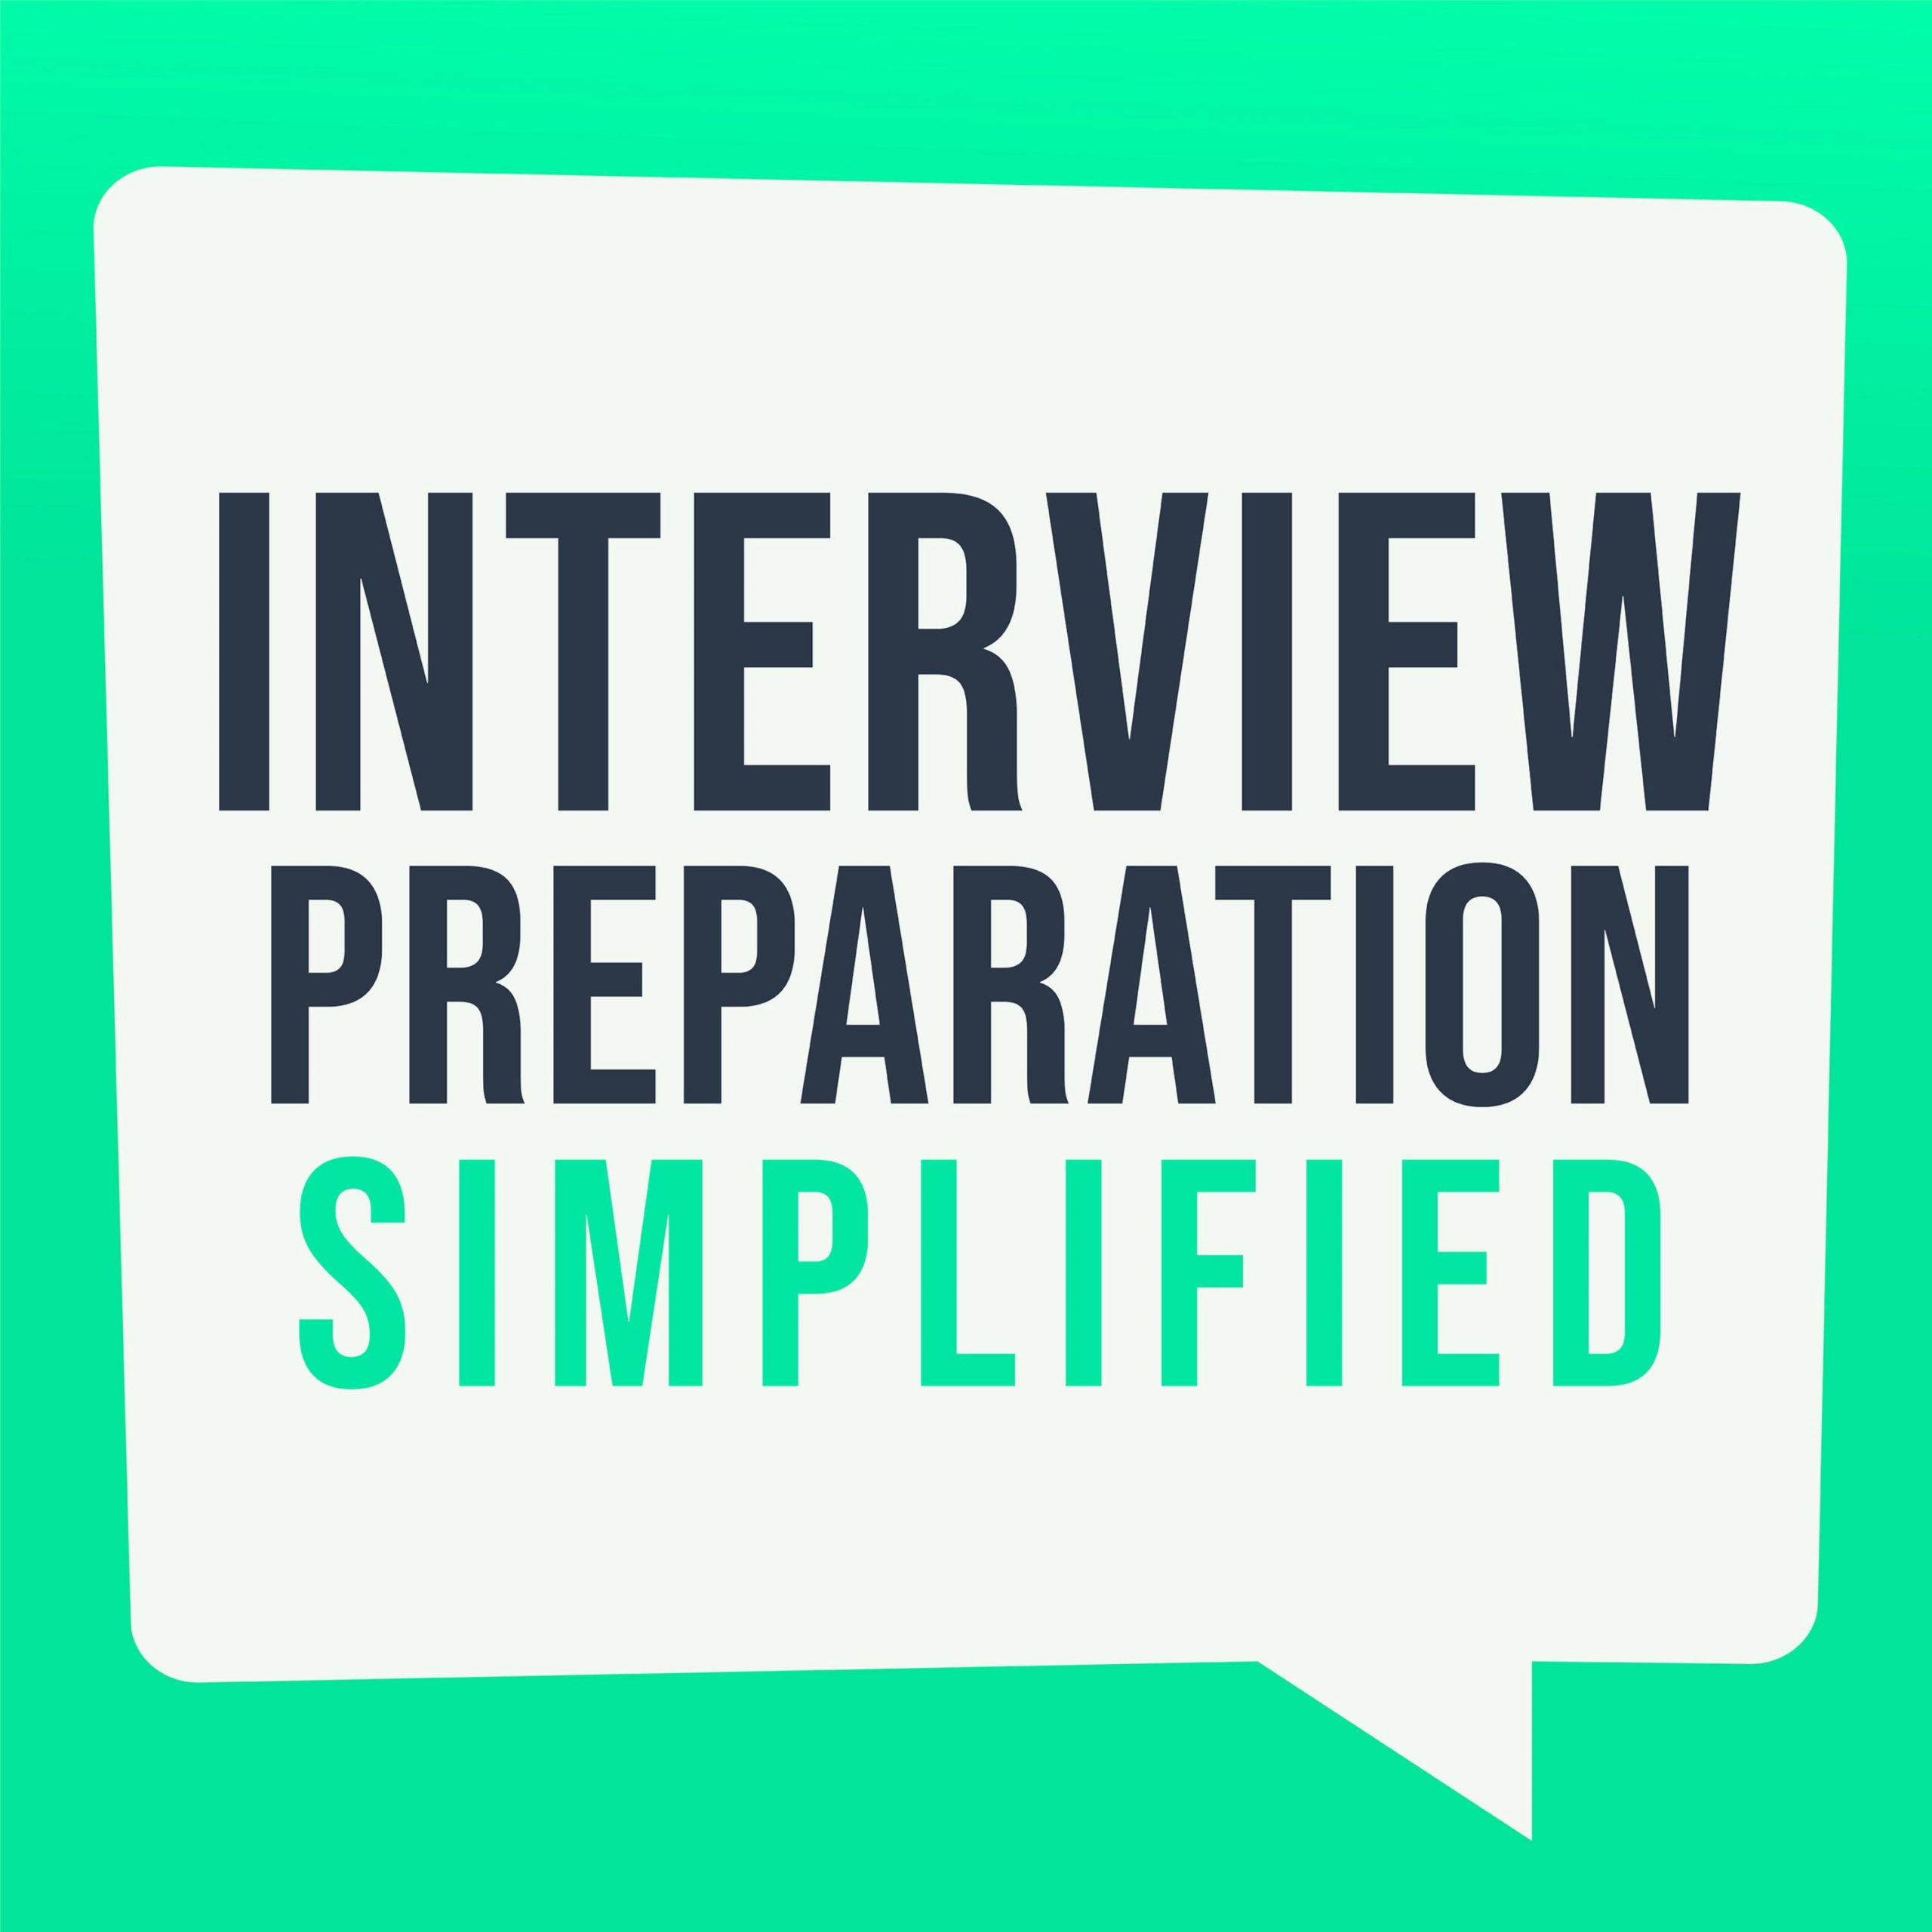 Tell me about your background. – Interview Preparation Simplified